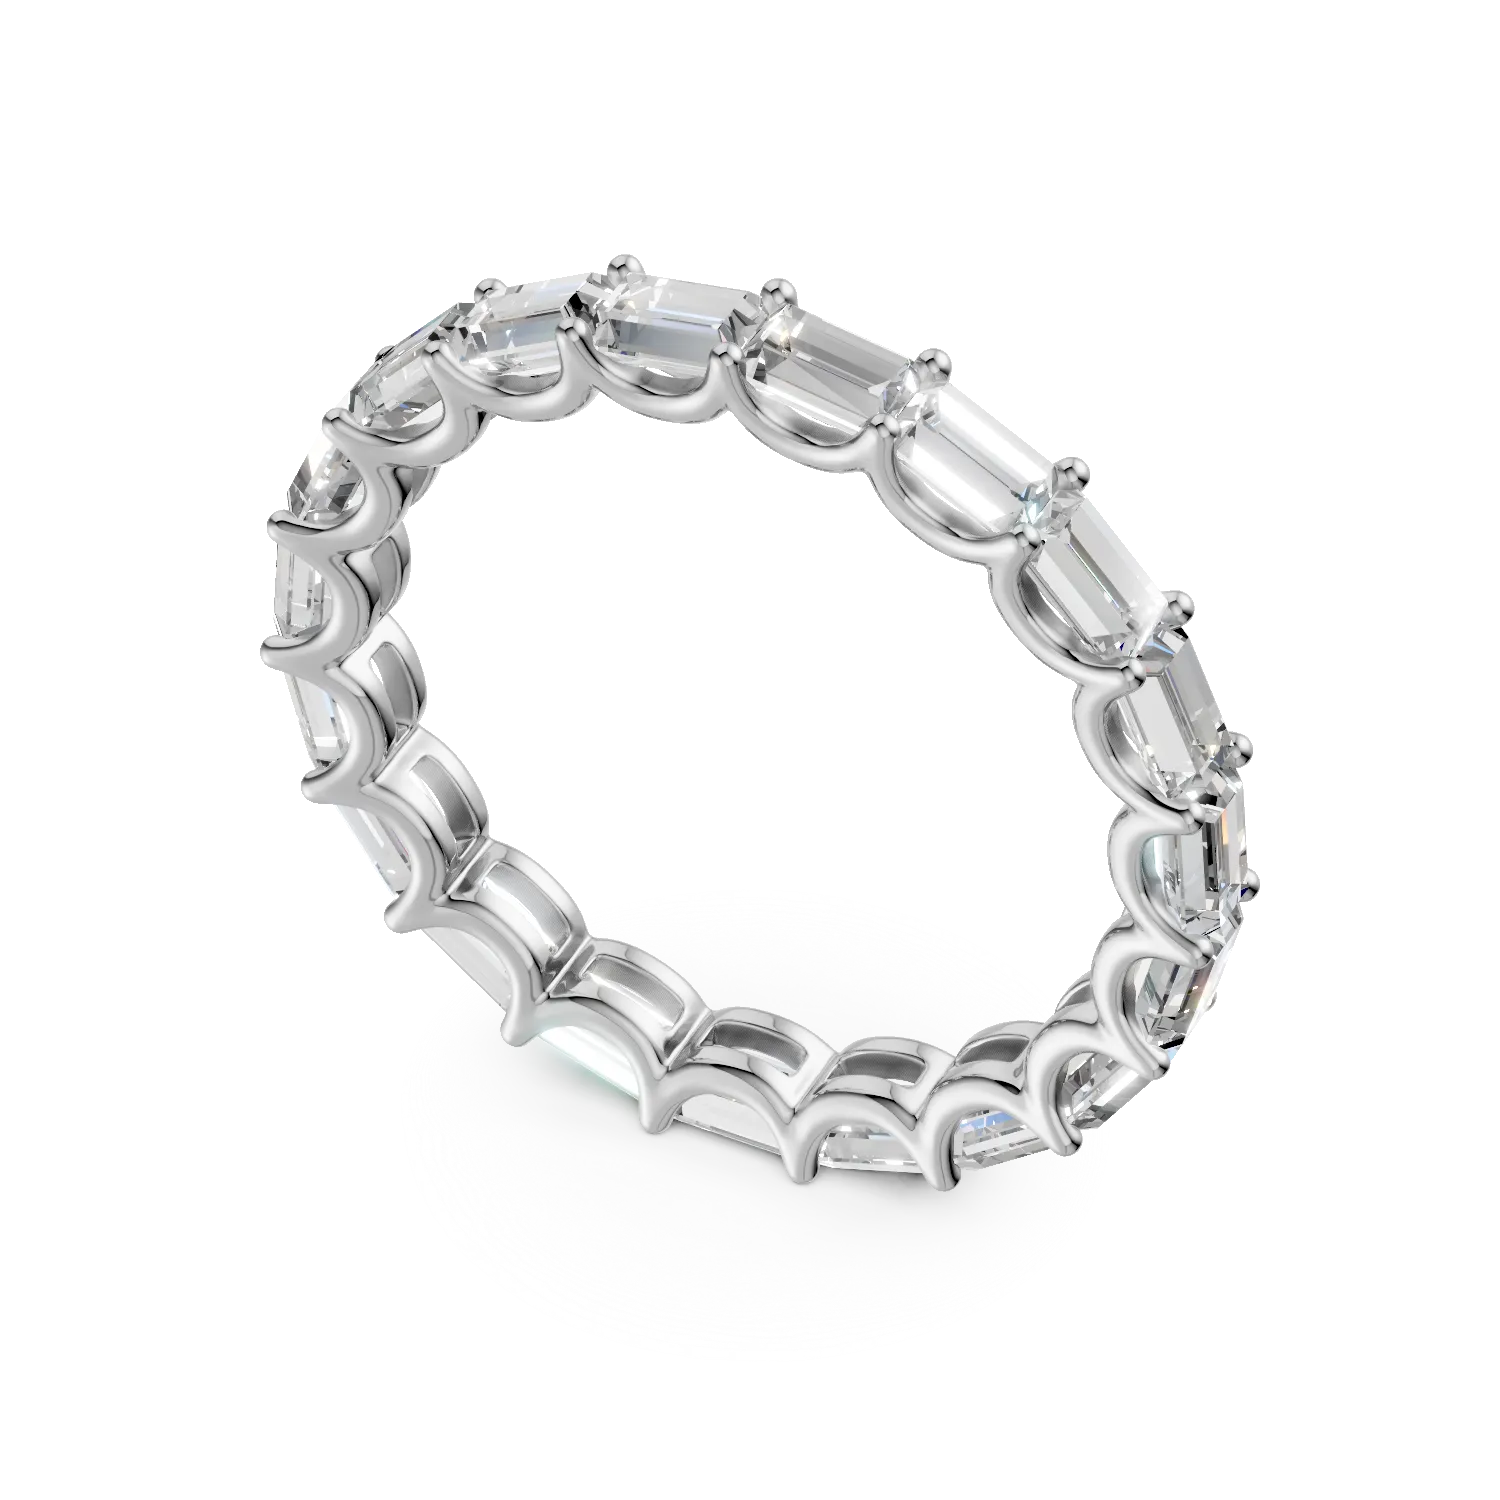 Eternity Grace ring in white gold with 2.2ct lab grown diamonds